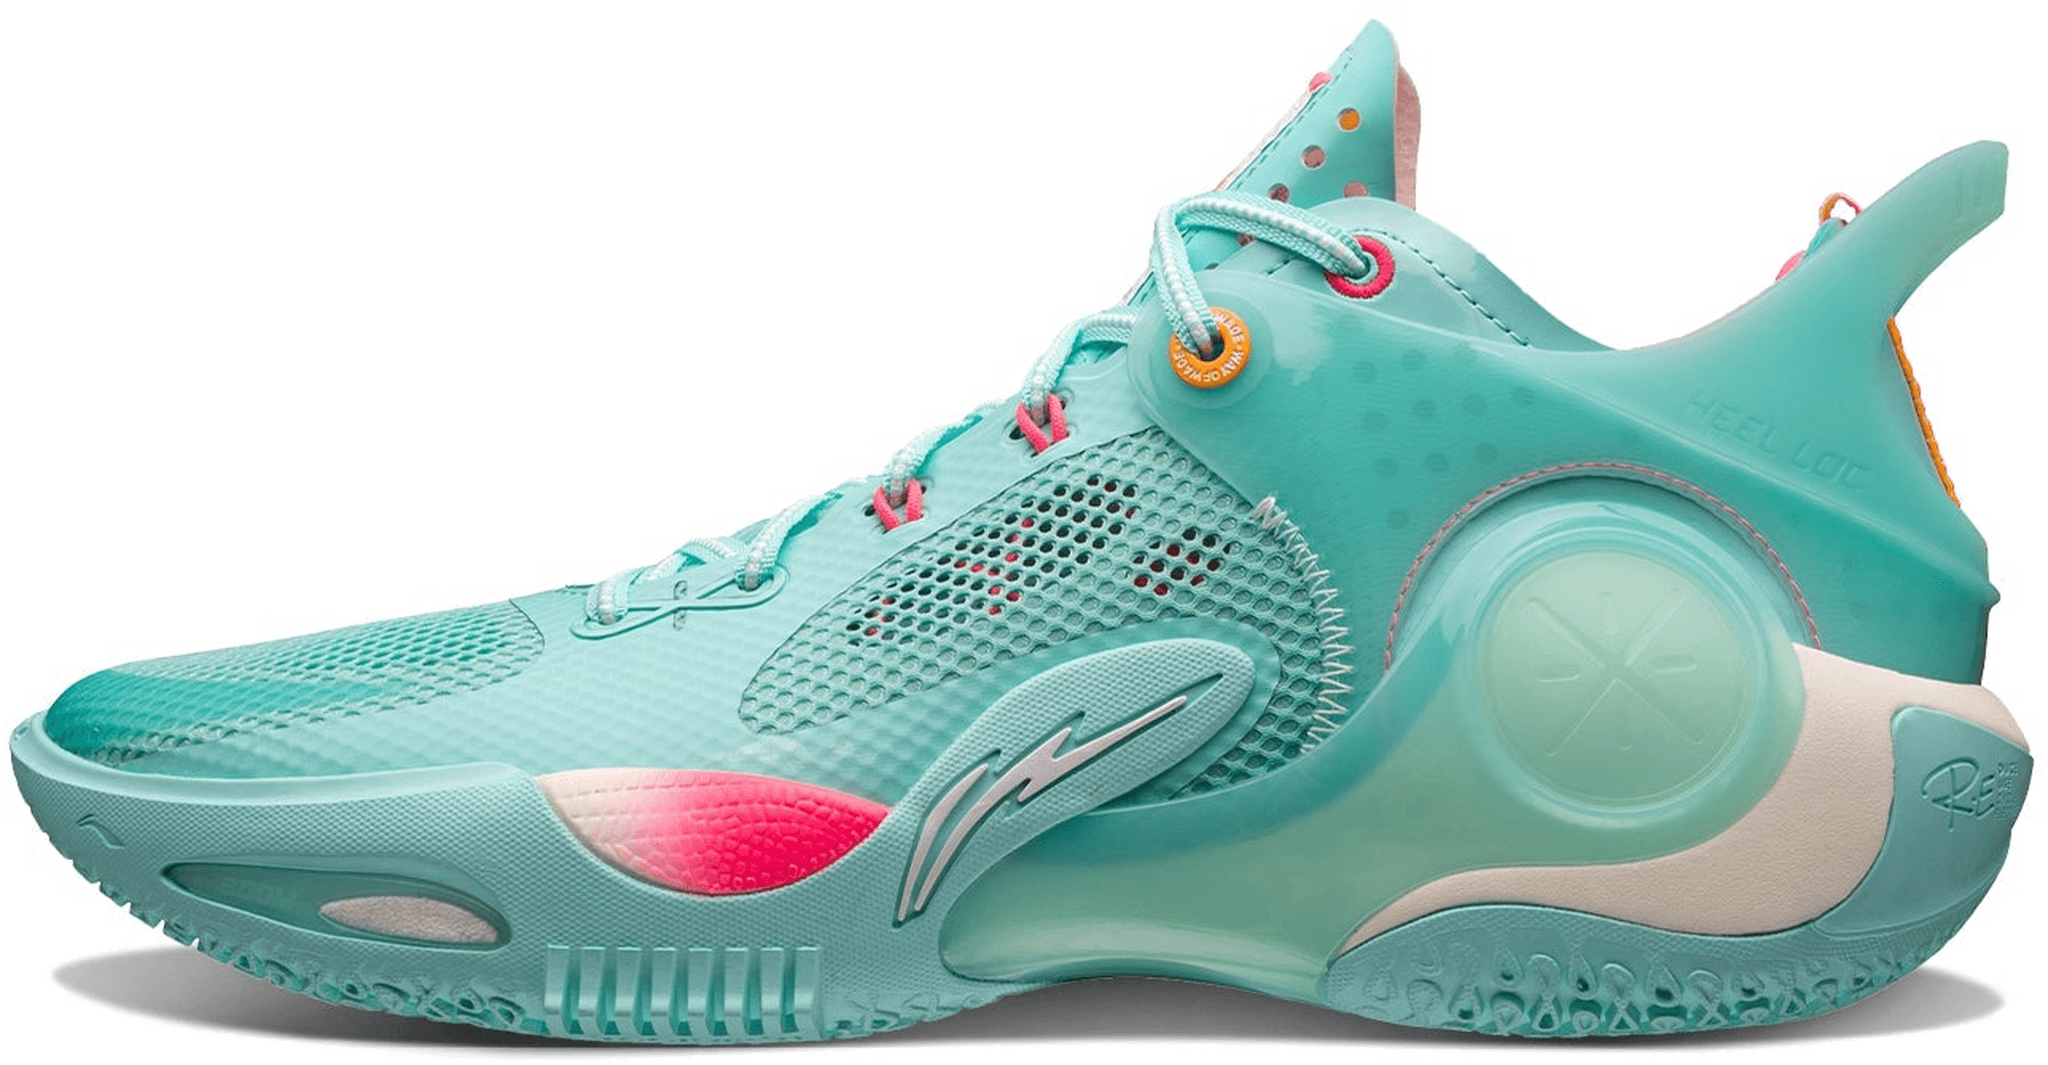 Li-Ning Wade Fission 8 - Review, Deals, Pics of 5 Colorways